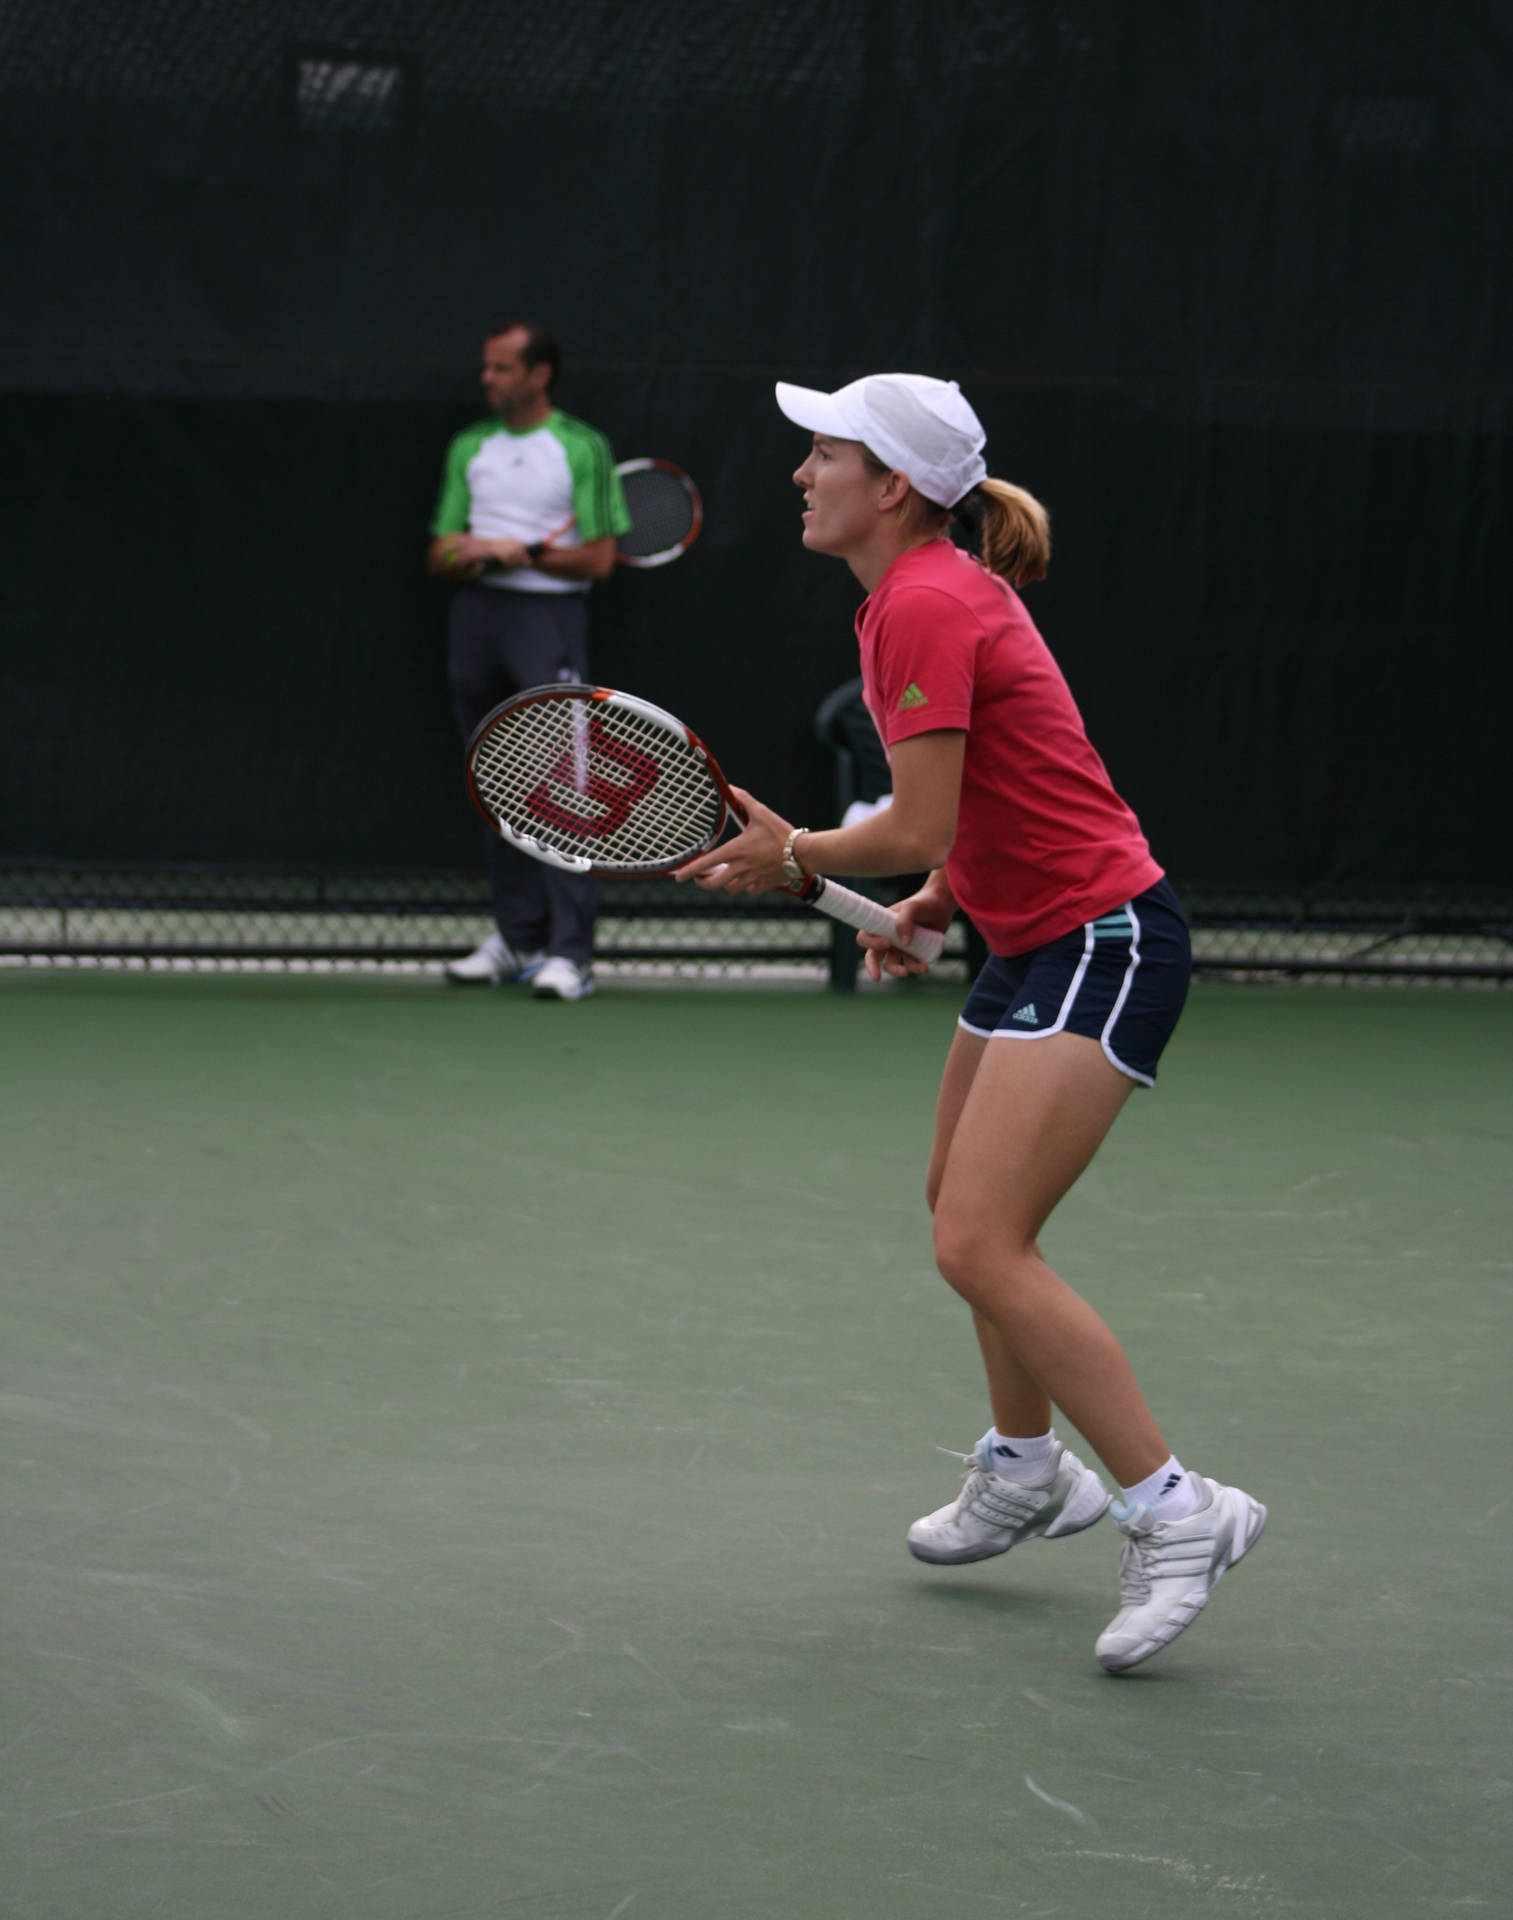 Justine Henin Showcasing Her Skills at The Rogers Cup Wallpaper